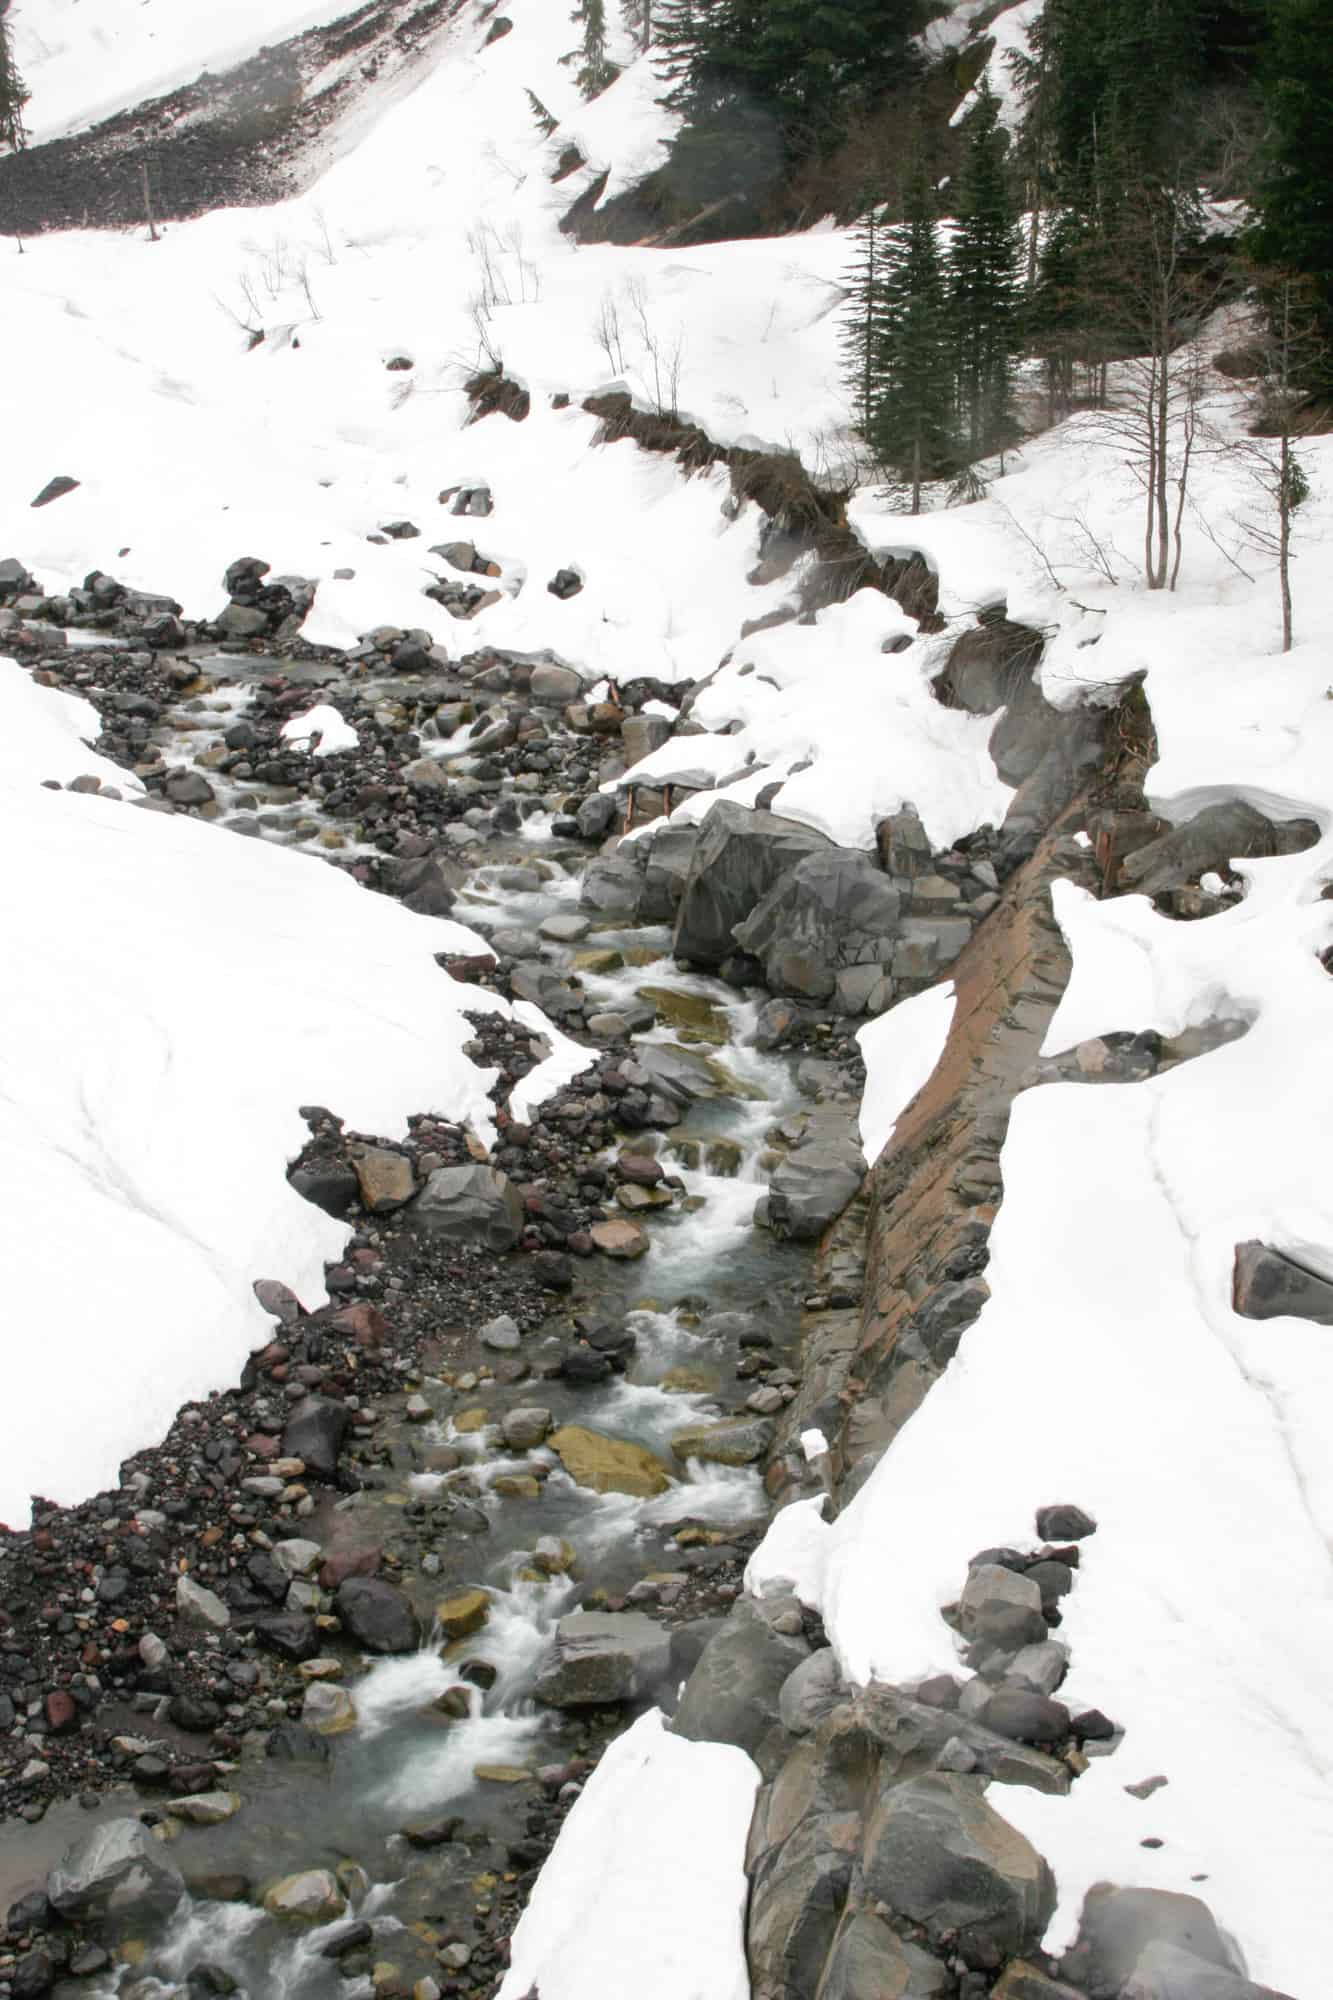 the snow is beginning to melt on mount rainier as this small creek is no longer frozen, but the edges of the rocky creek bed are still covered in glaze of snow